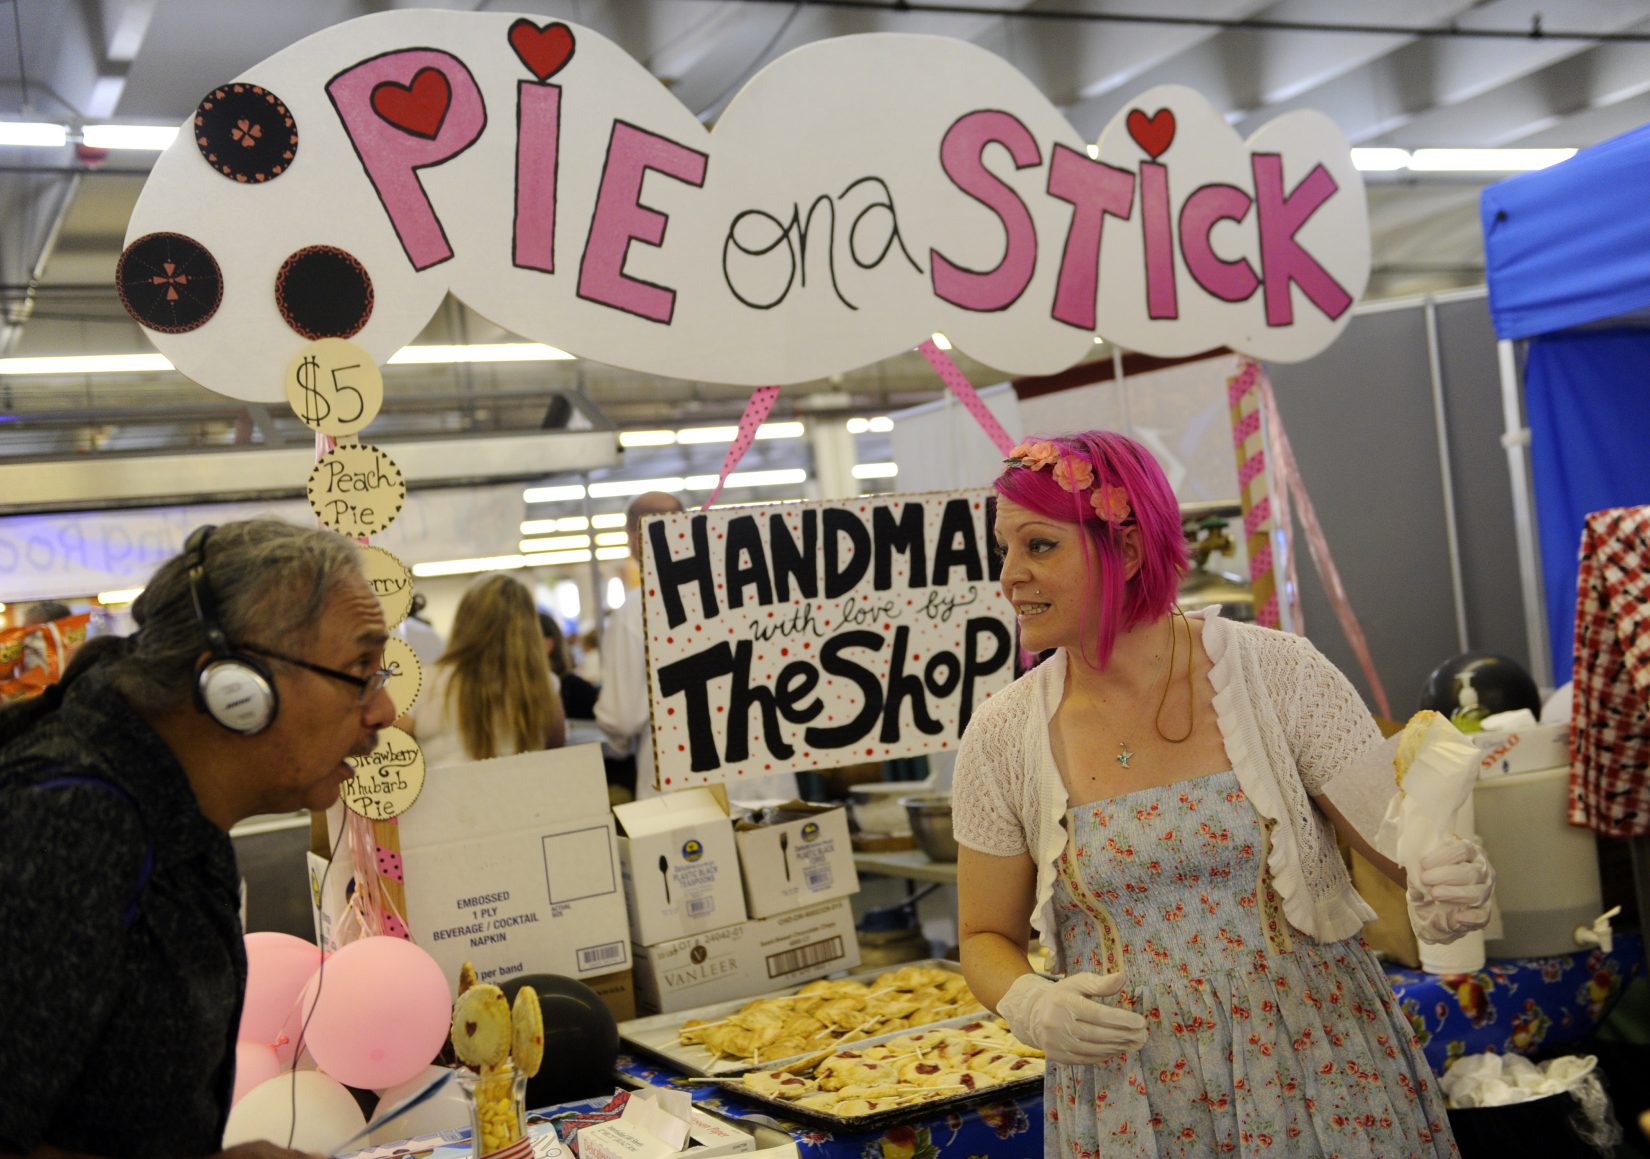 Megs Burd offered four varieties of pie on a stick at the Denver County Fair in August 2013.